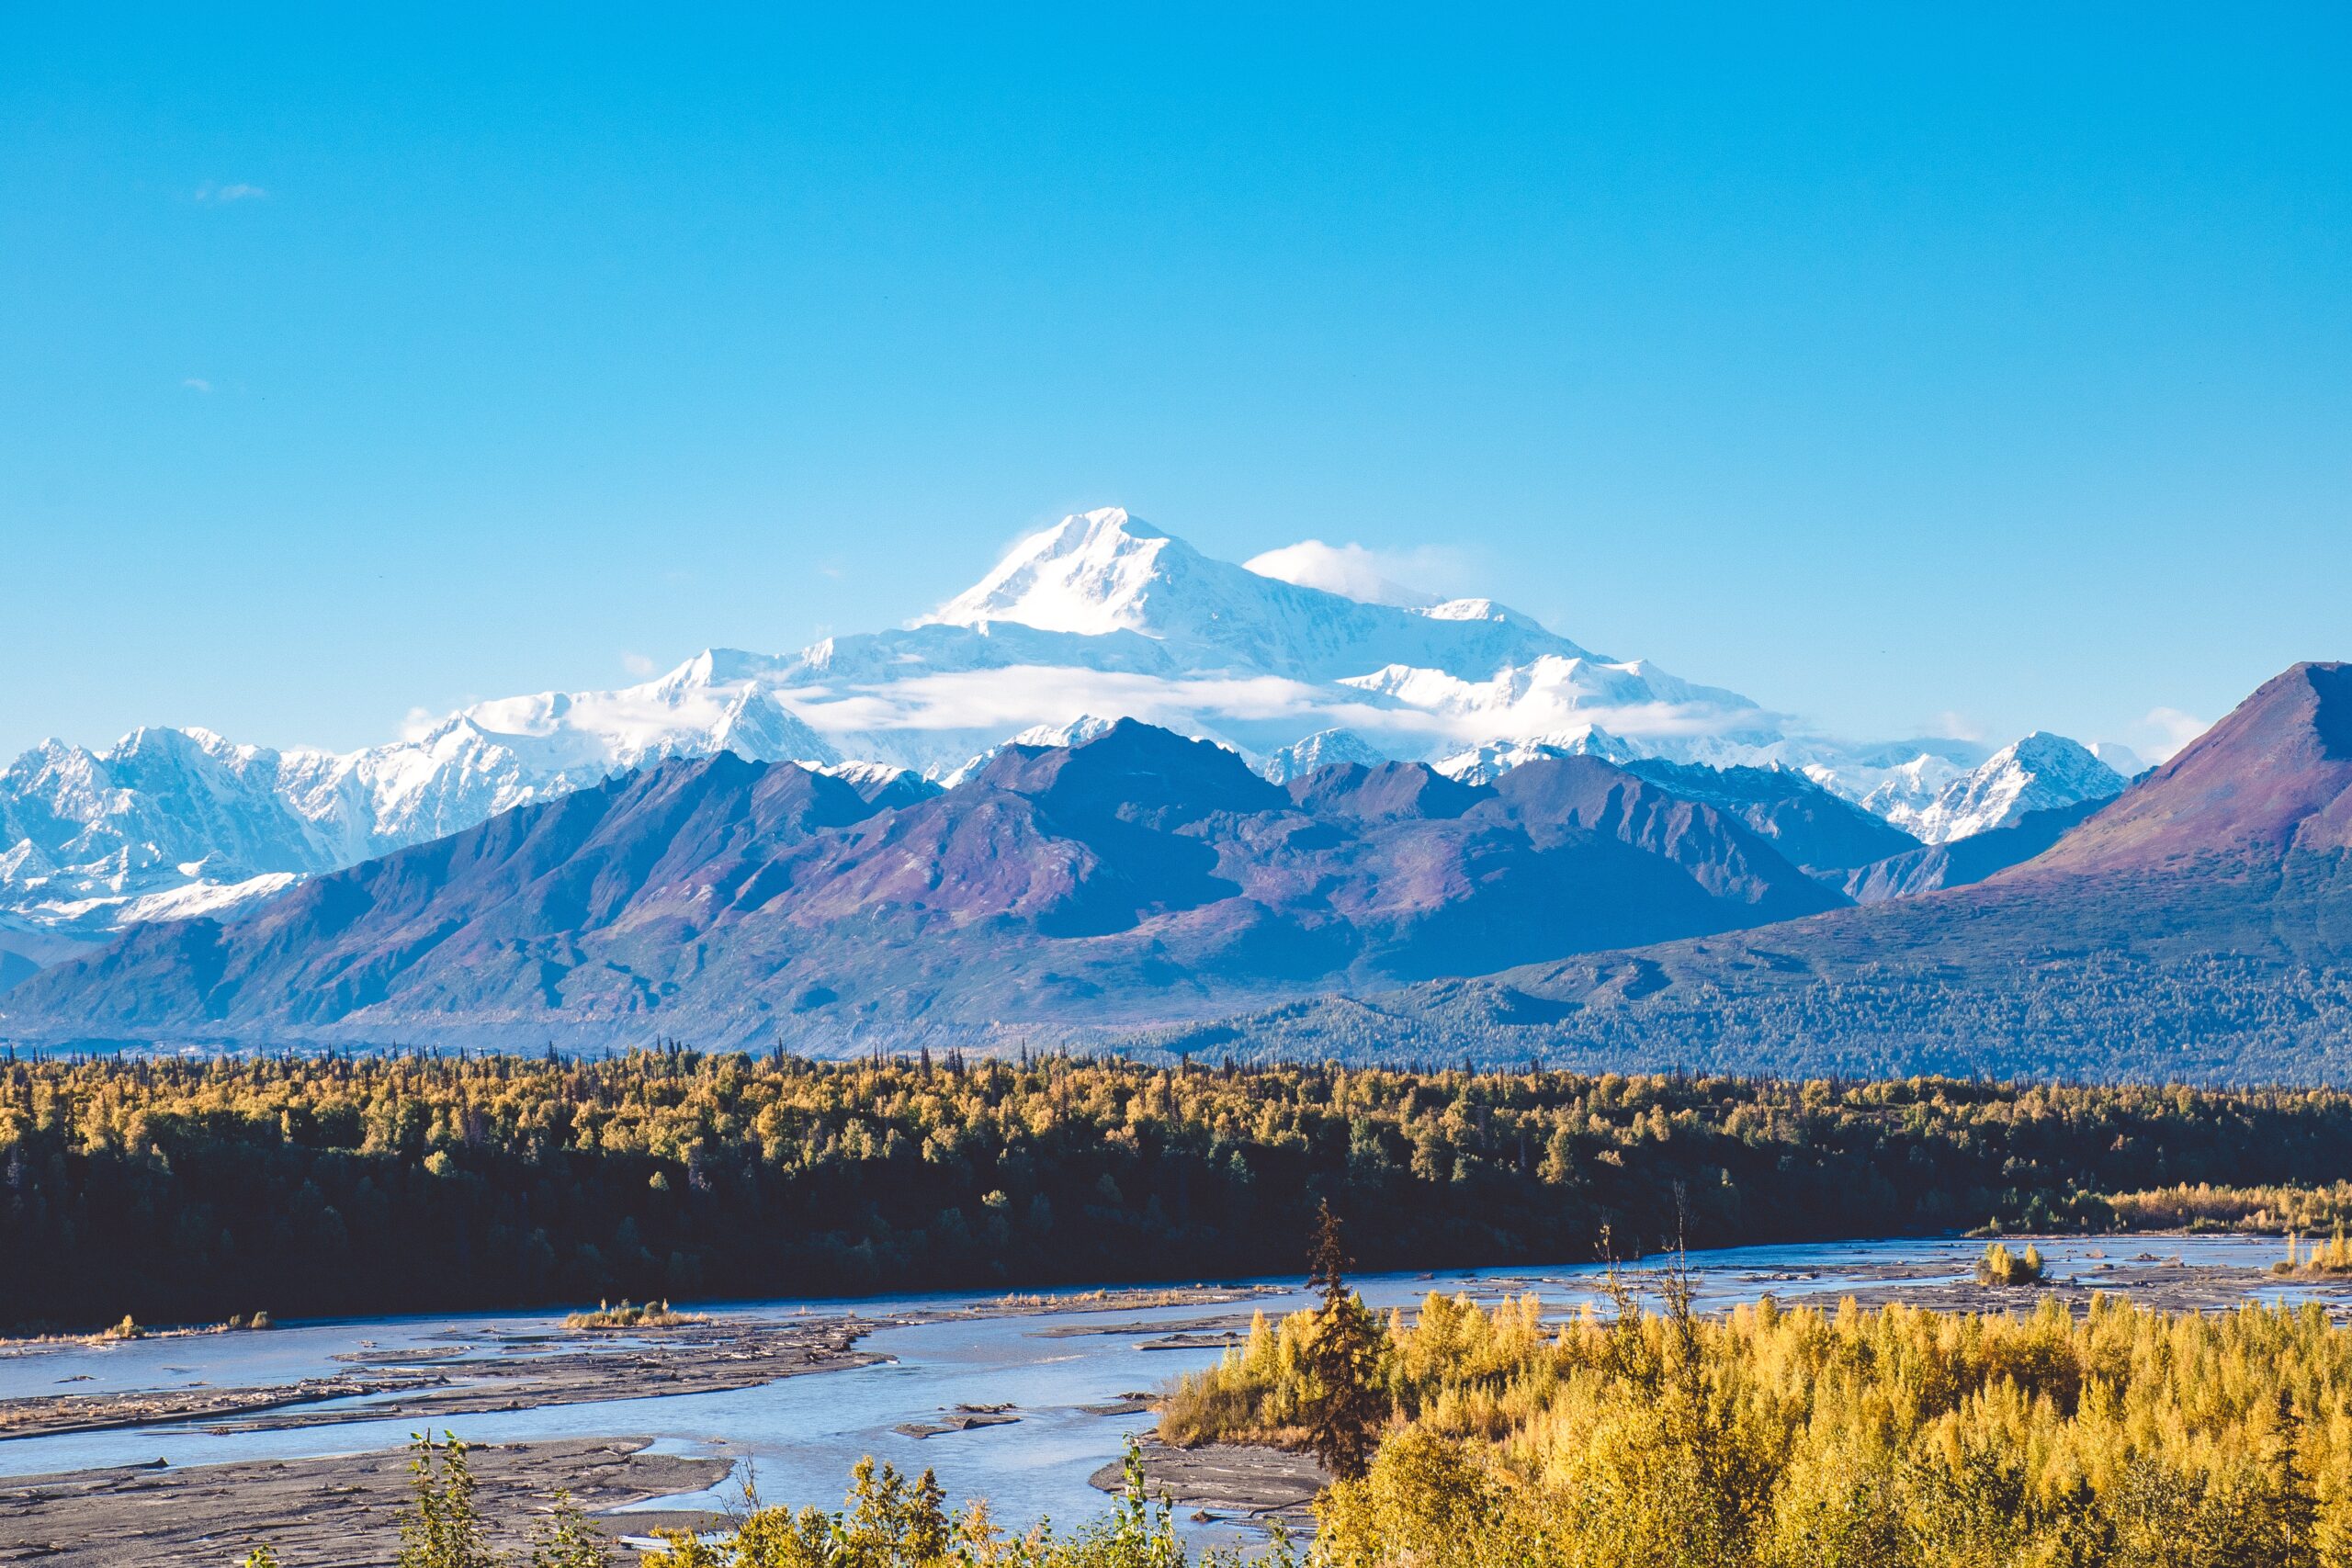 The Highest Mountains In The US - Mount McKinley in Alaska